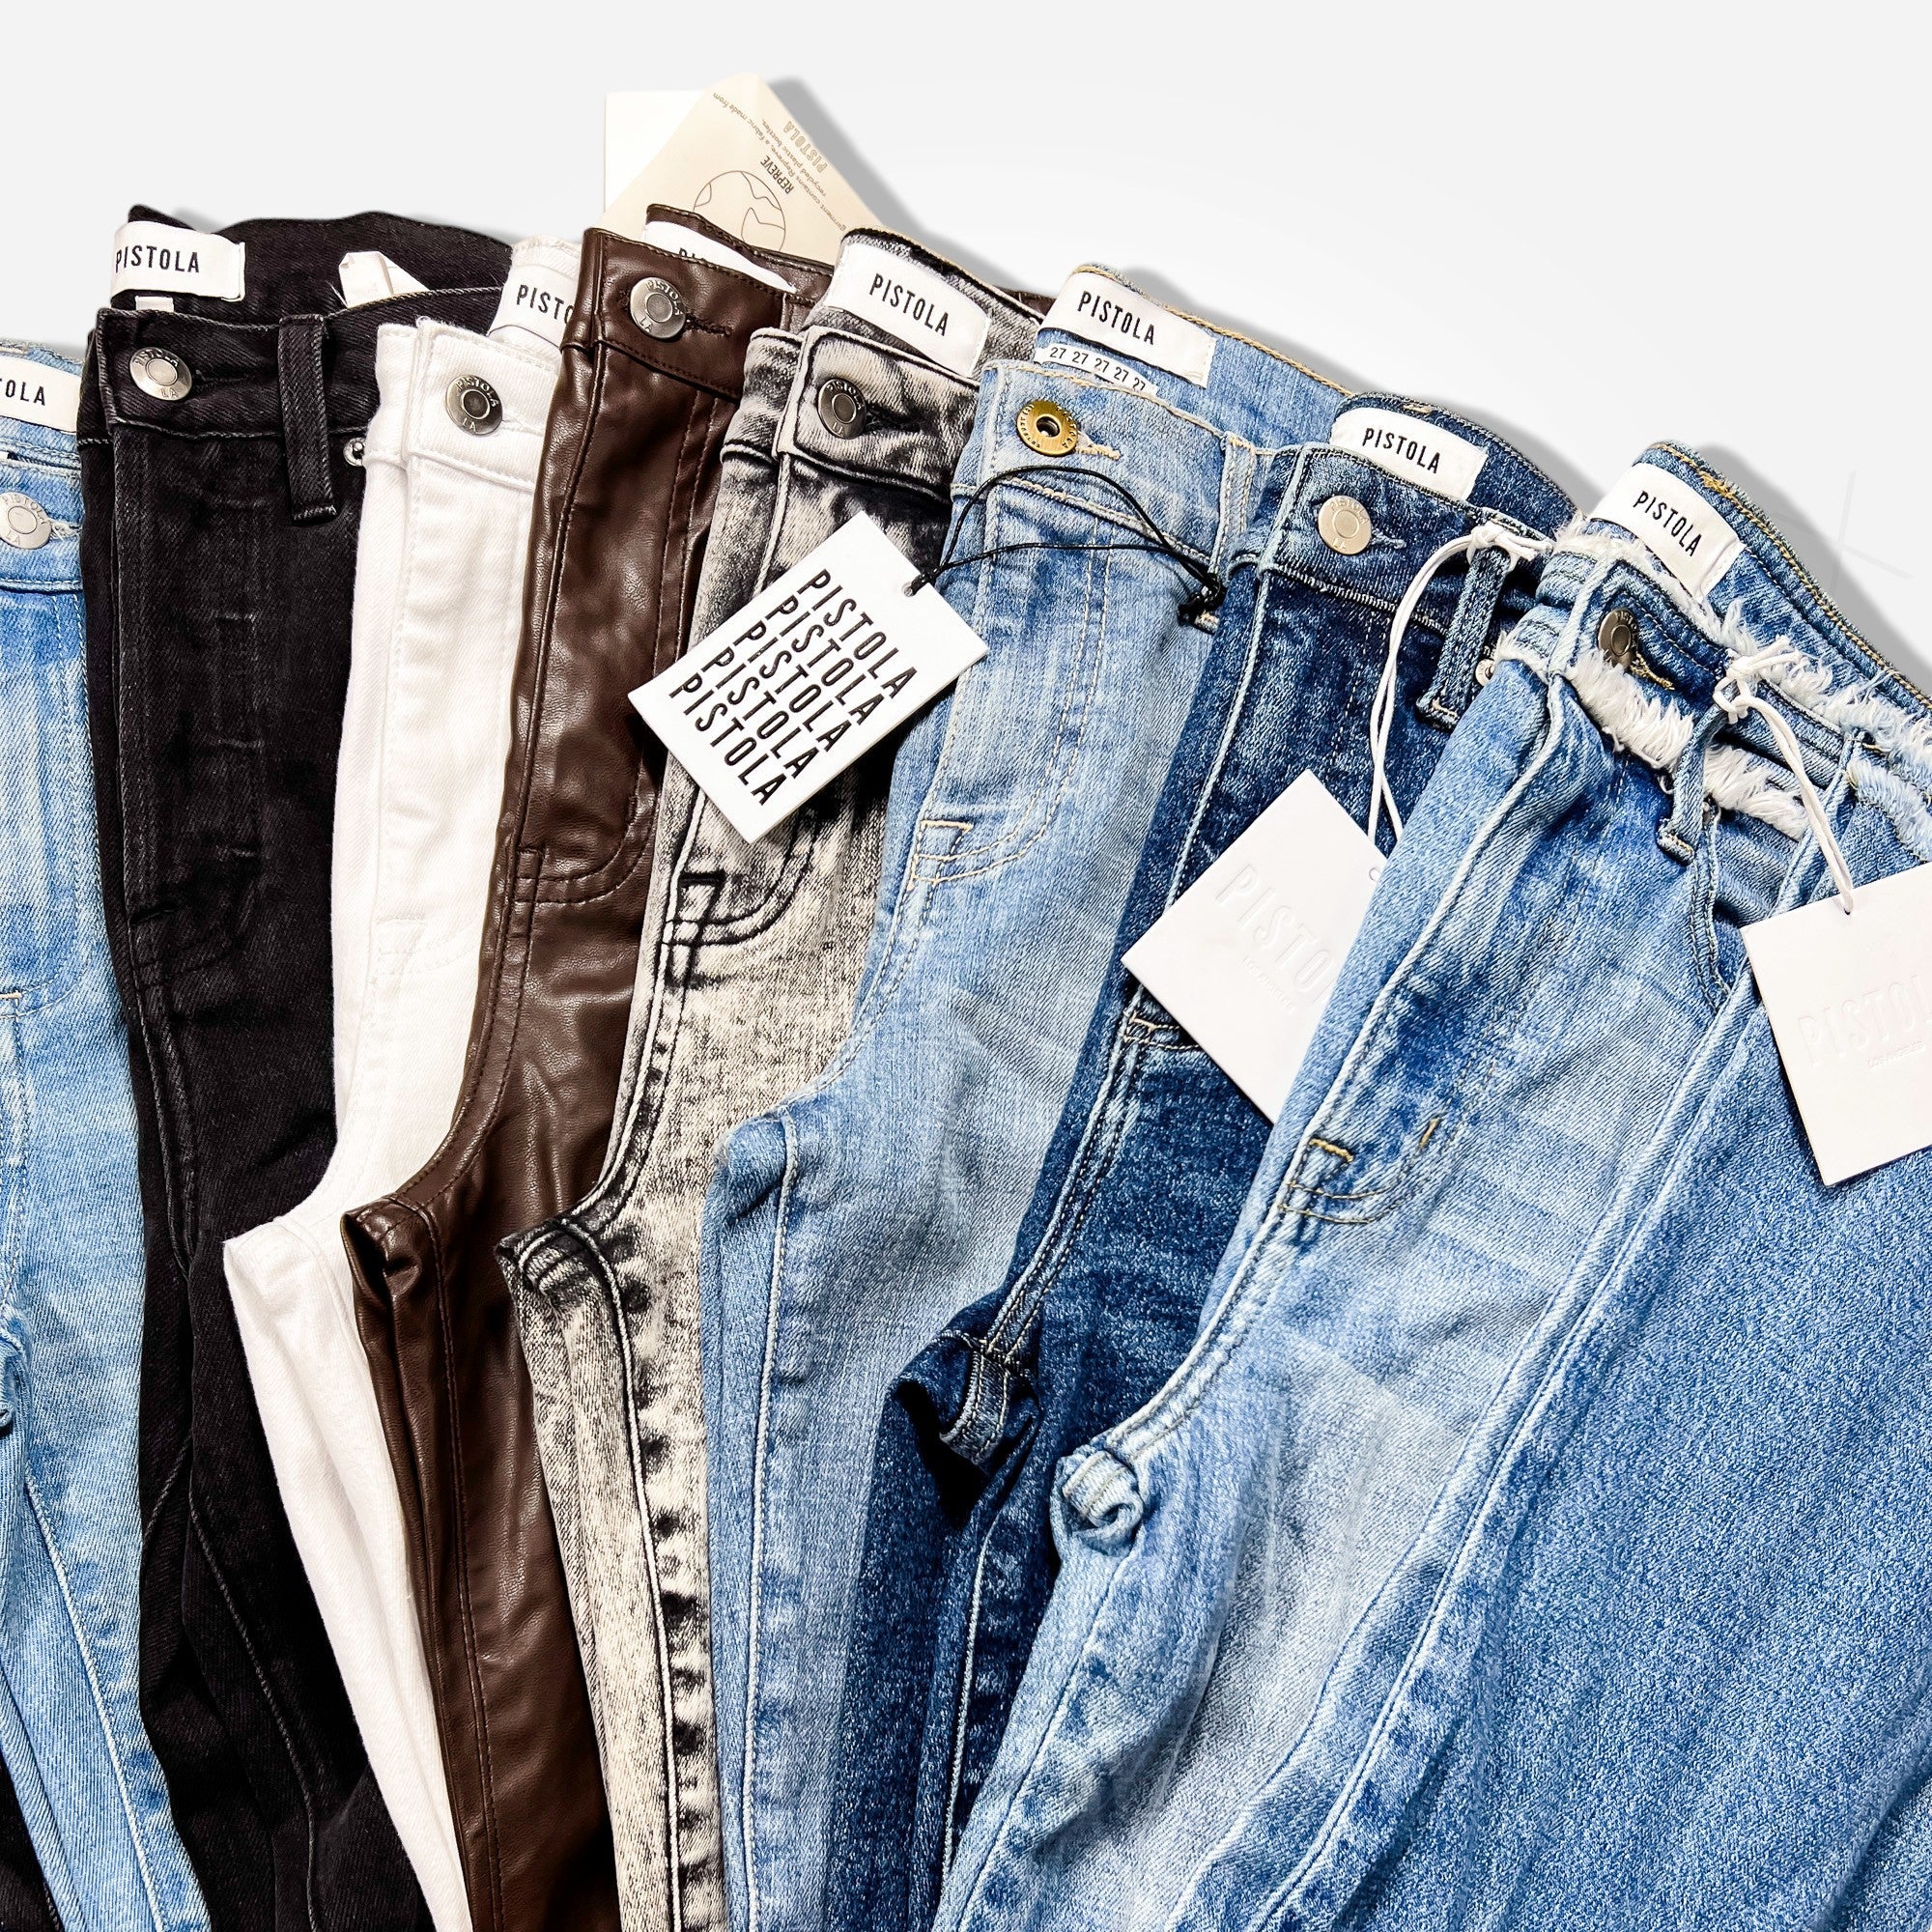 Pistola Denim & Clothing Women's New/Samples Wholesale Lot - Boutique by the Box Wholesale for Resellers